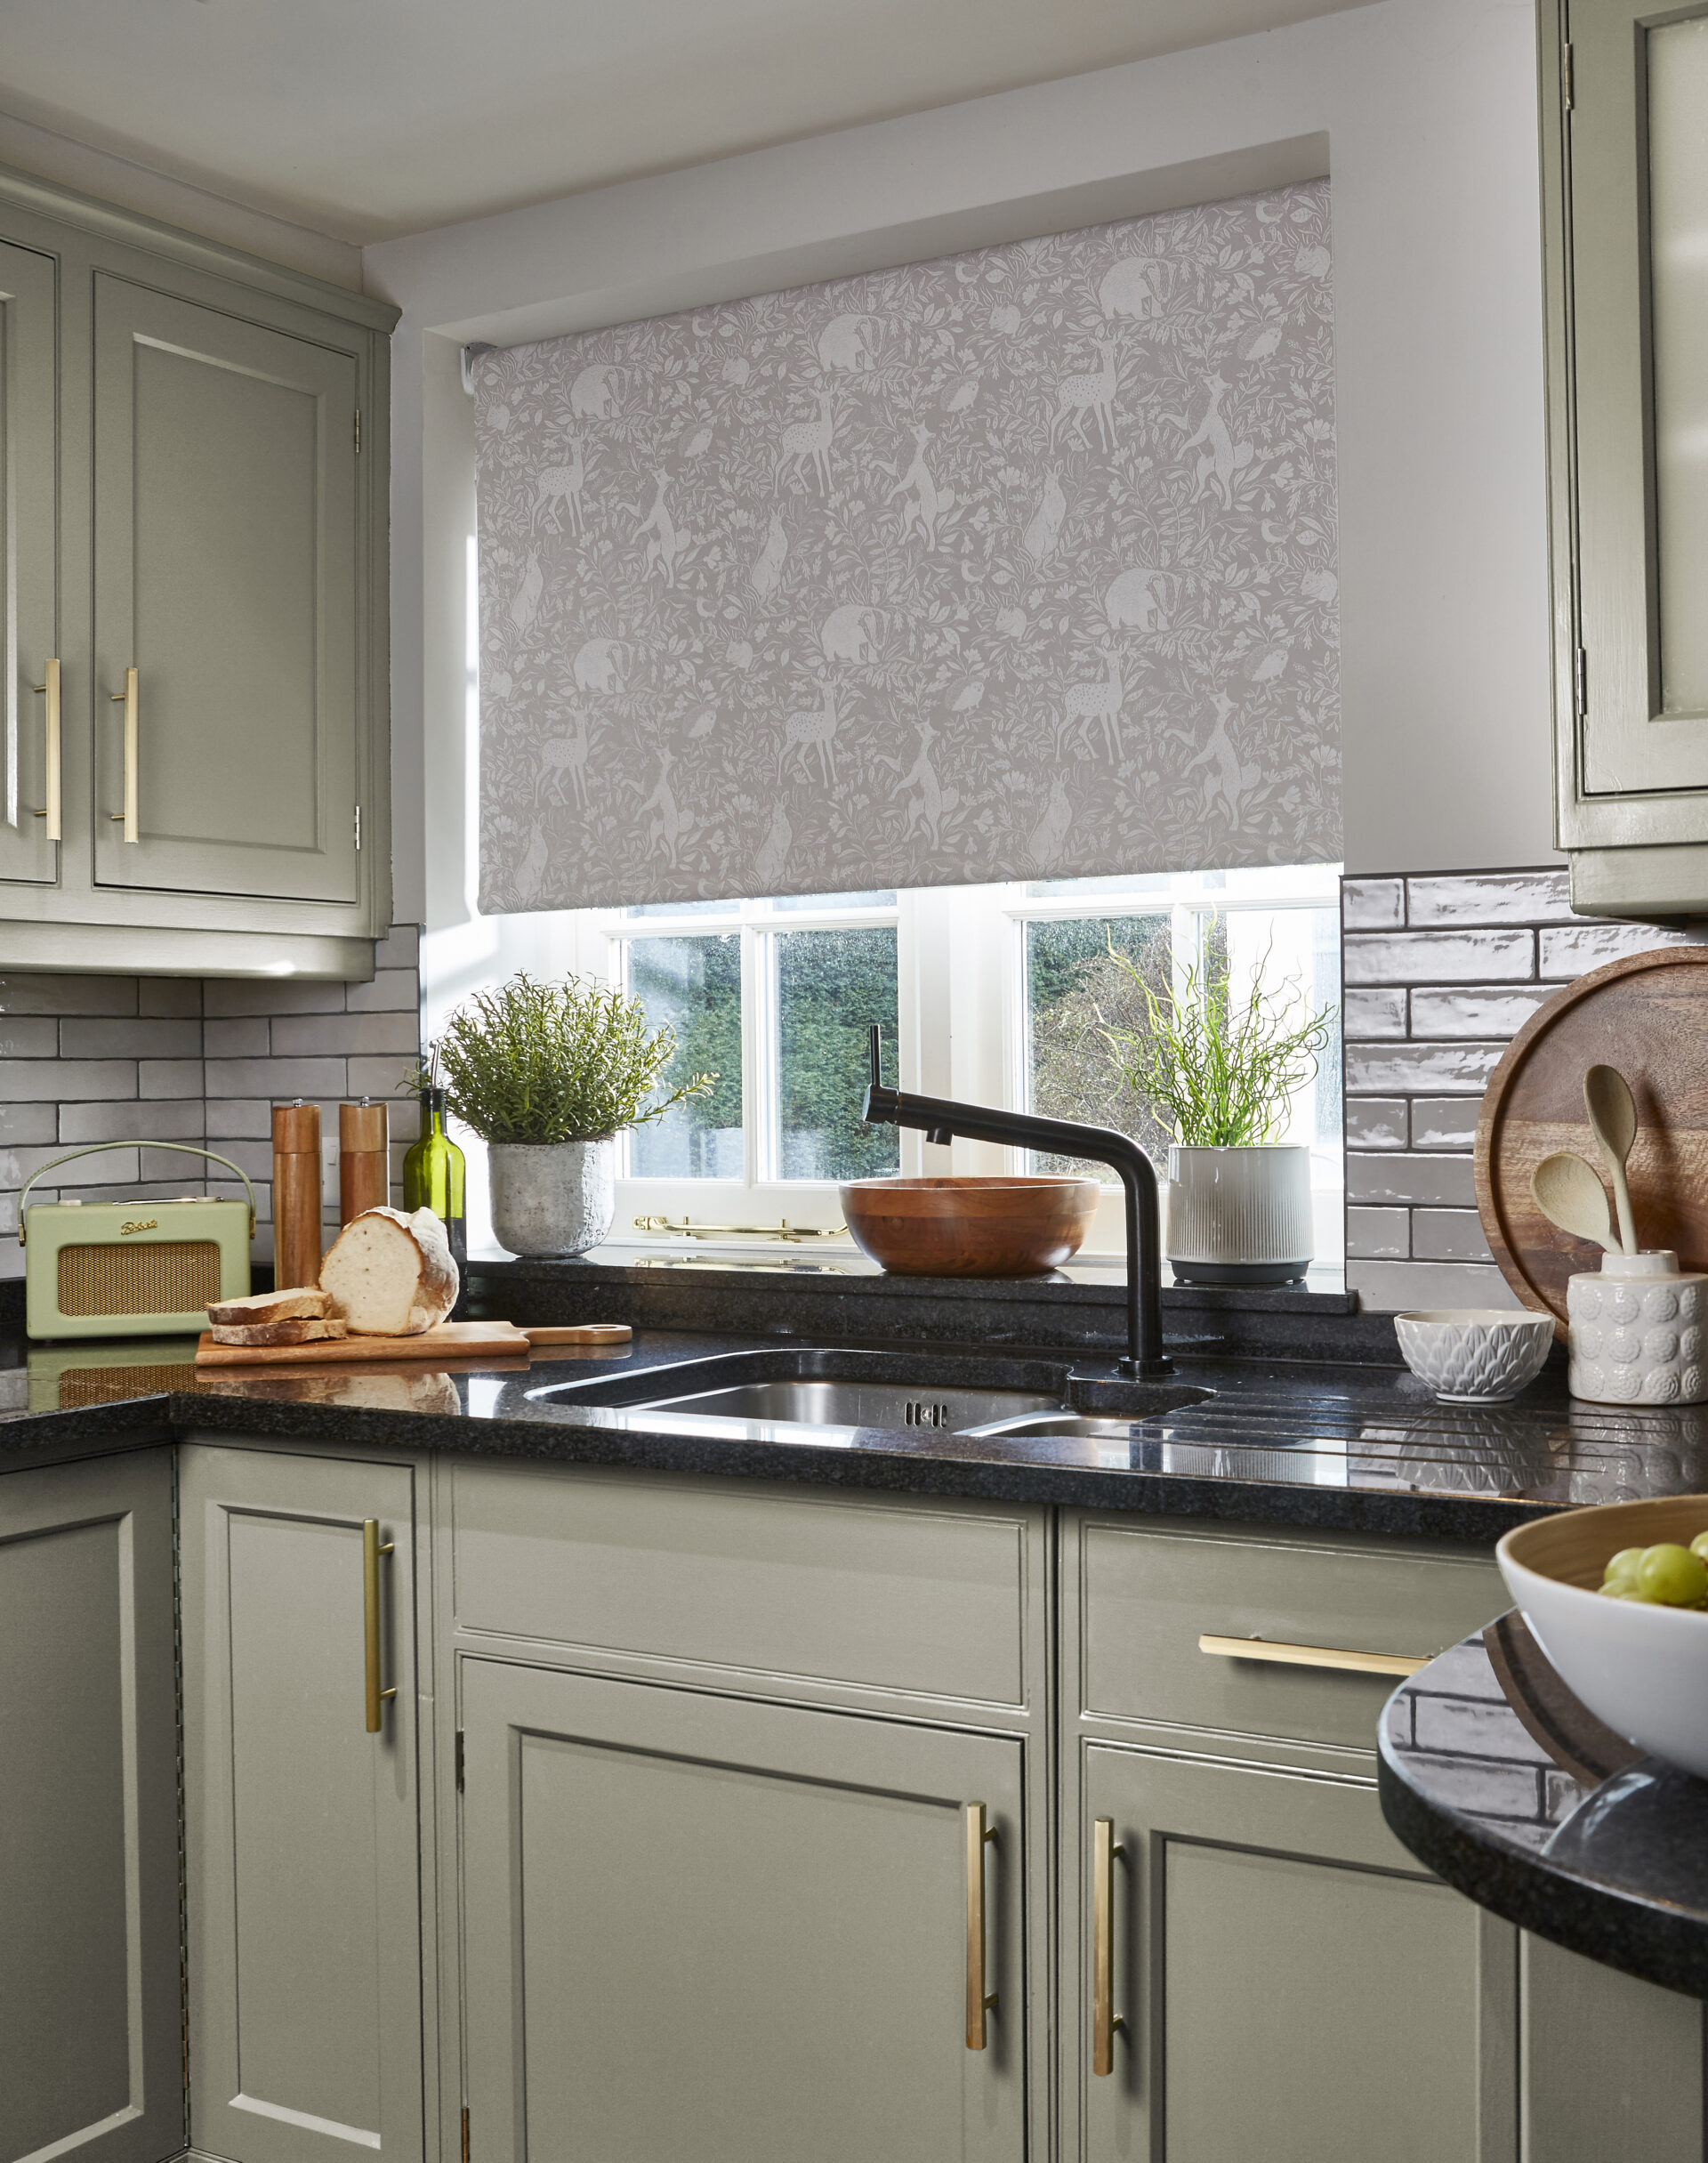 Country kitchen roller blind